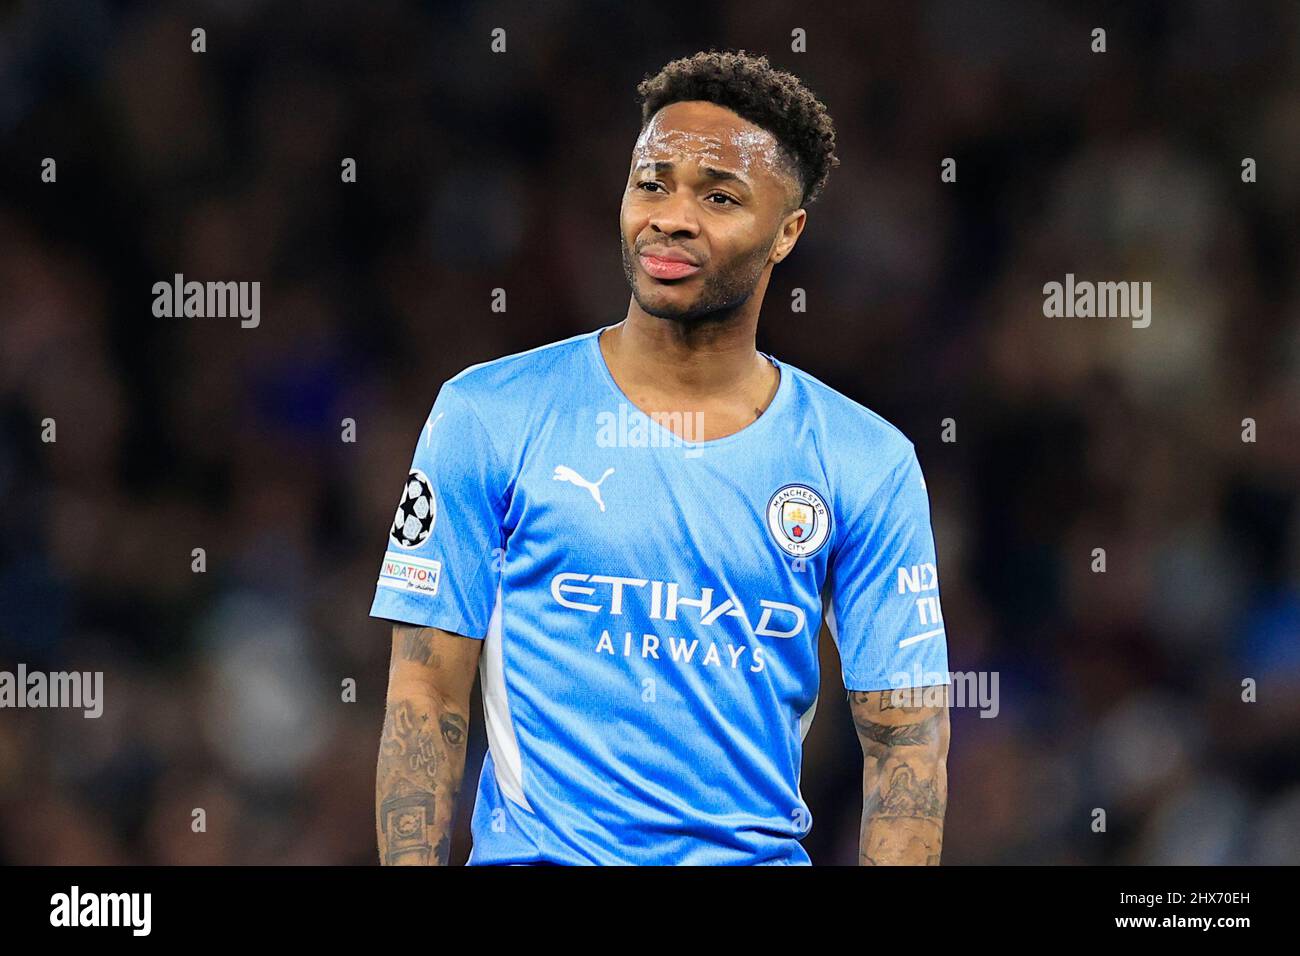 Raheem Sterling #7 of Manchester City Stock Photo